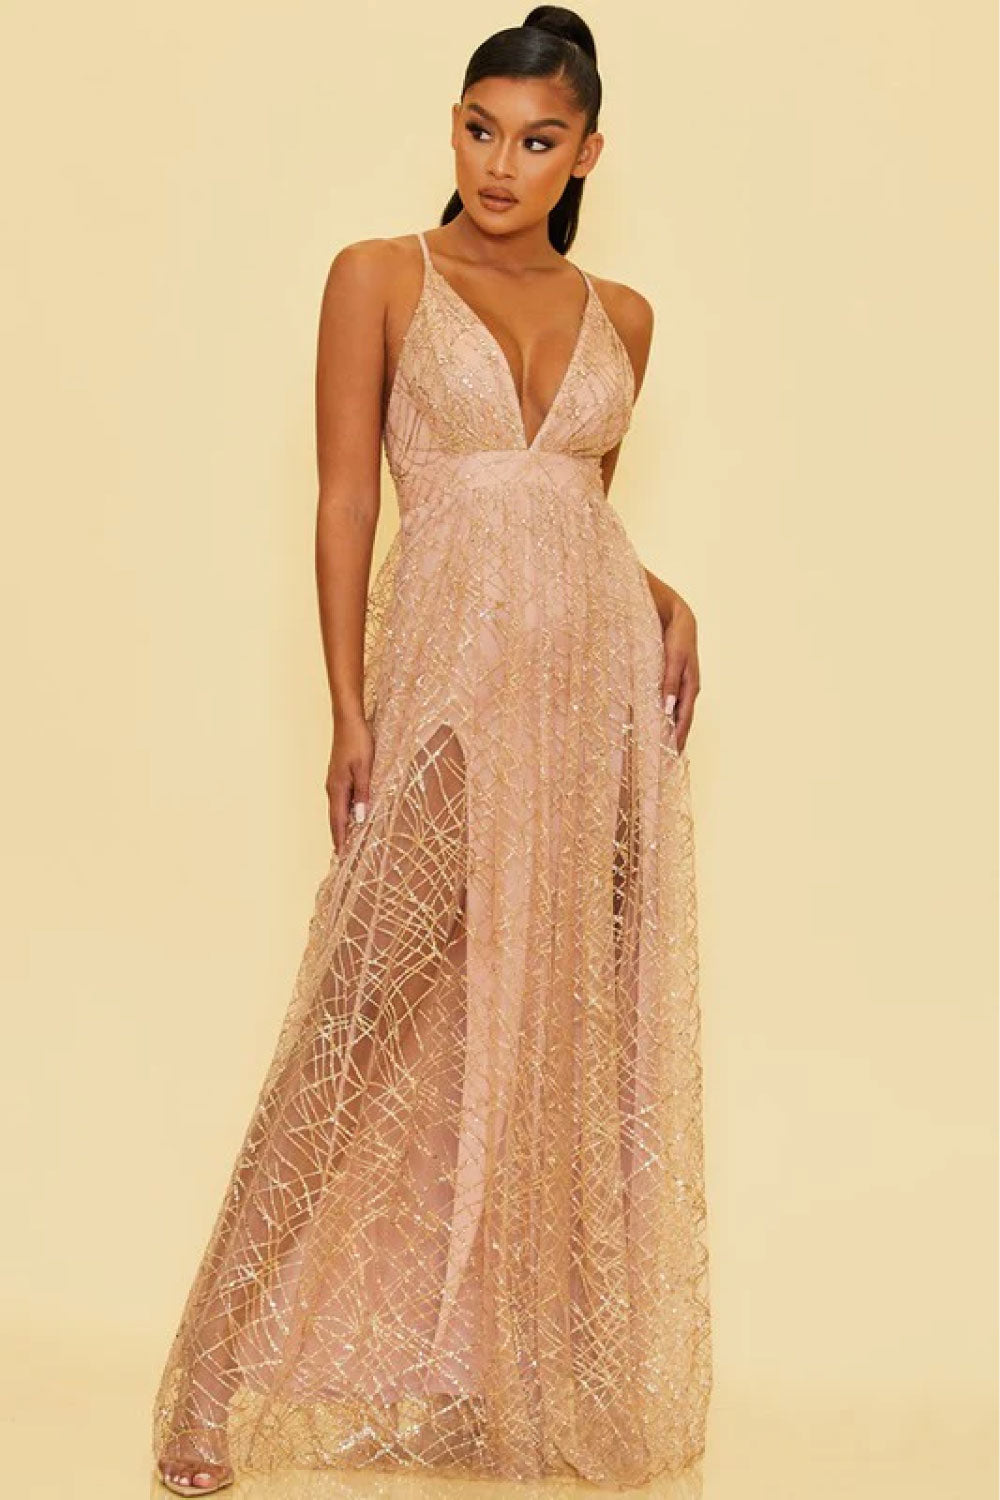 Image of the front of Luxxel's Glitter Layered Deep V-Neck Gown in Rose Gold on a model.